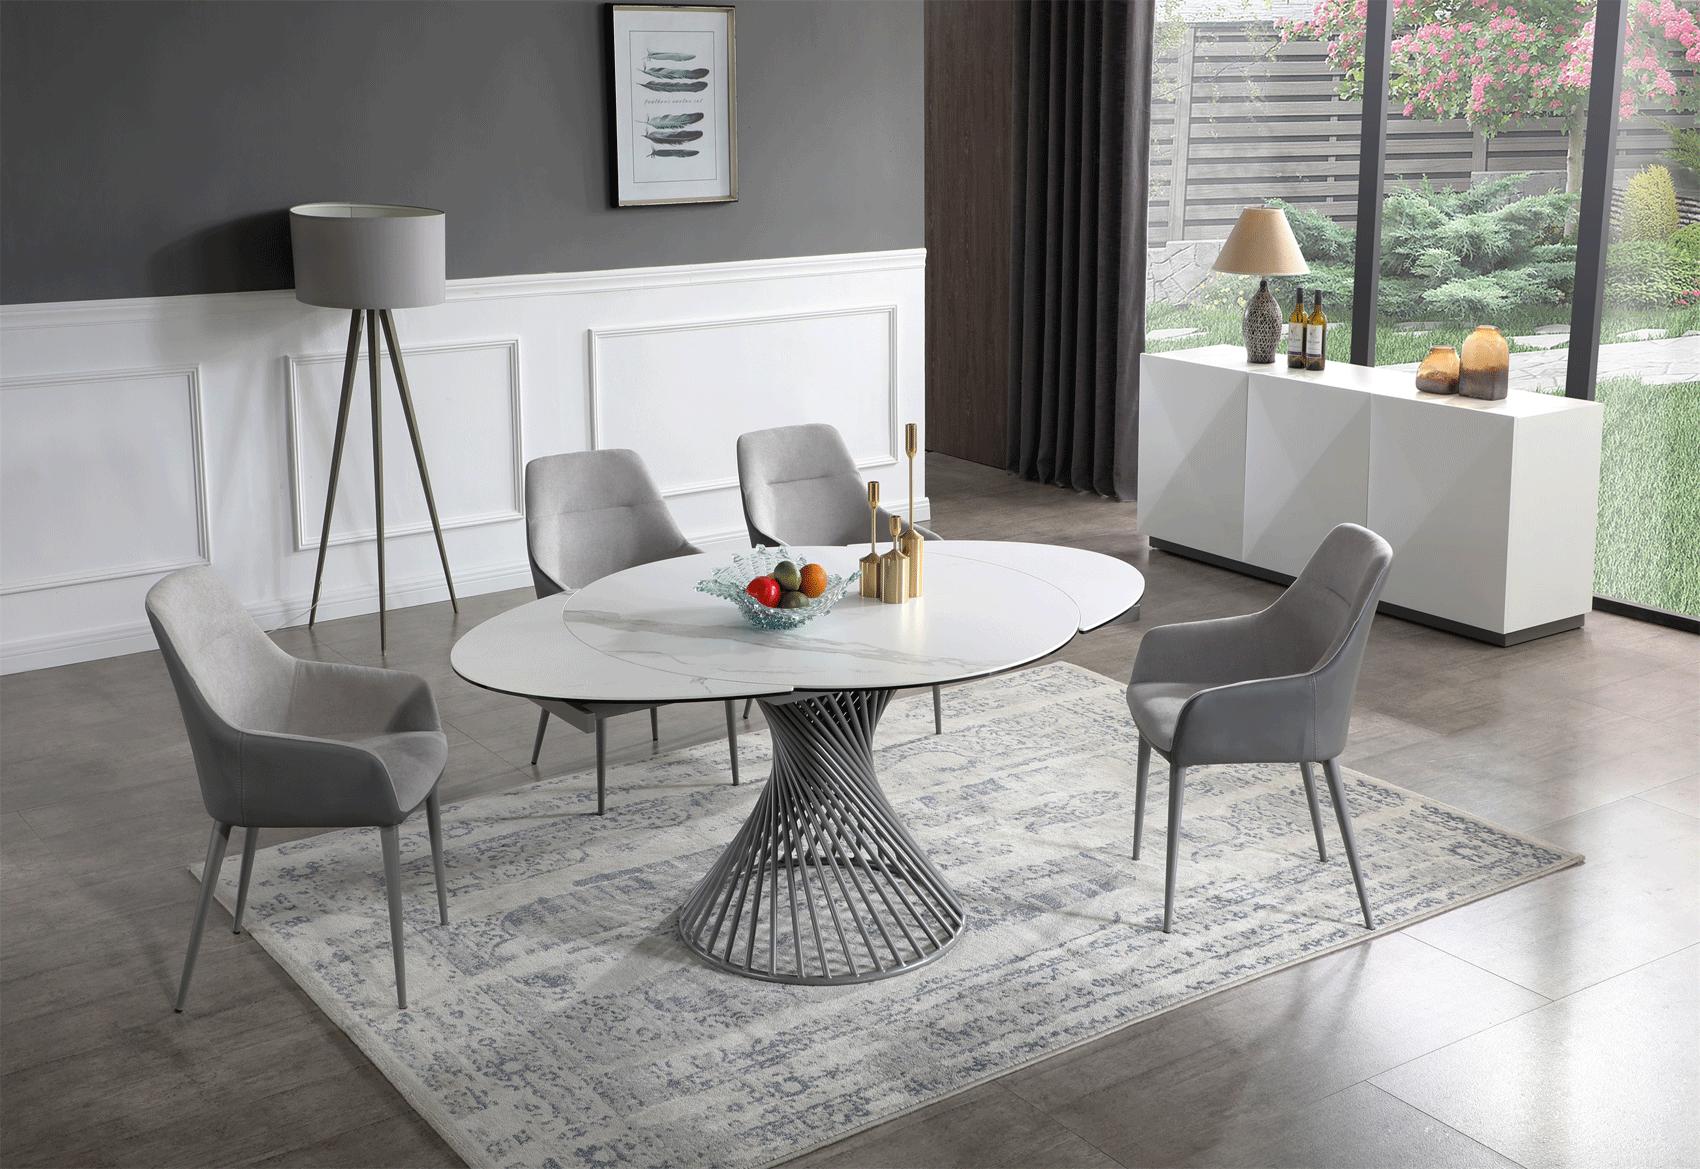 Contemporary Dining Table Set 9034DININGTABLE 9034DININGTABLE-6PC in White, Gray Fabric